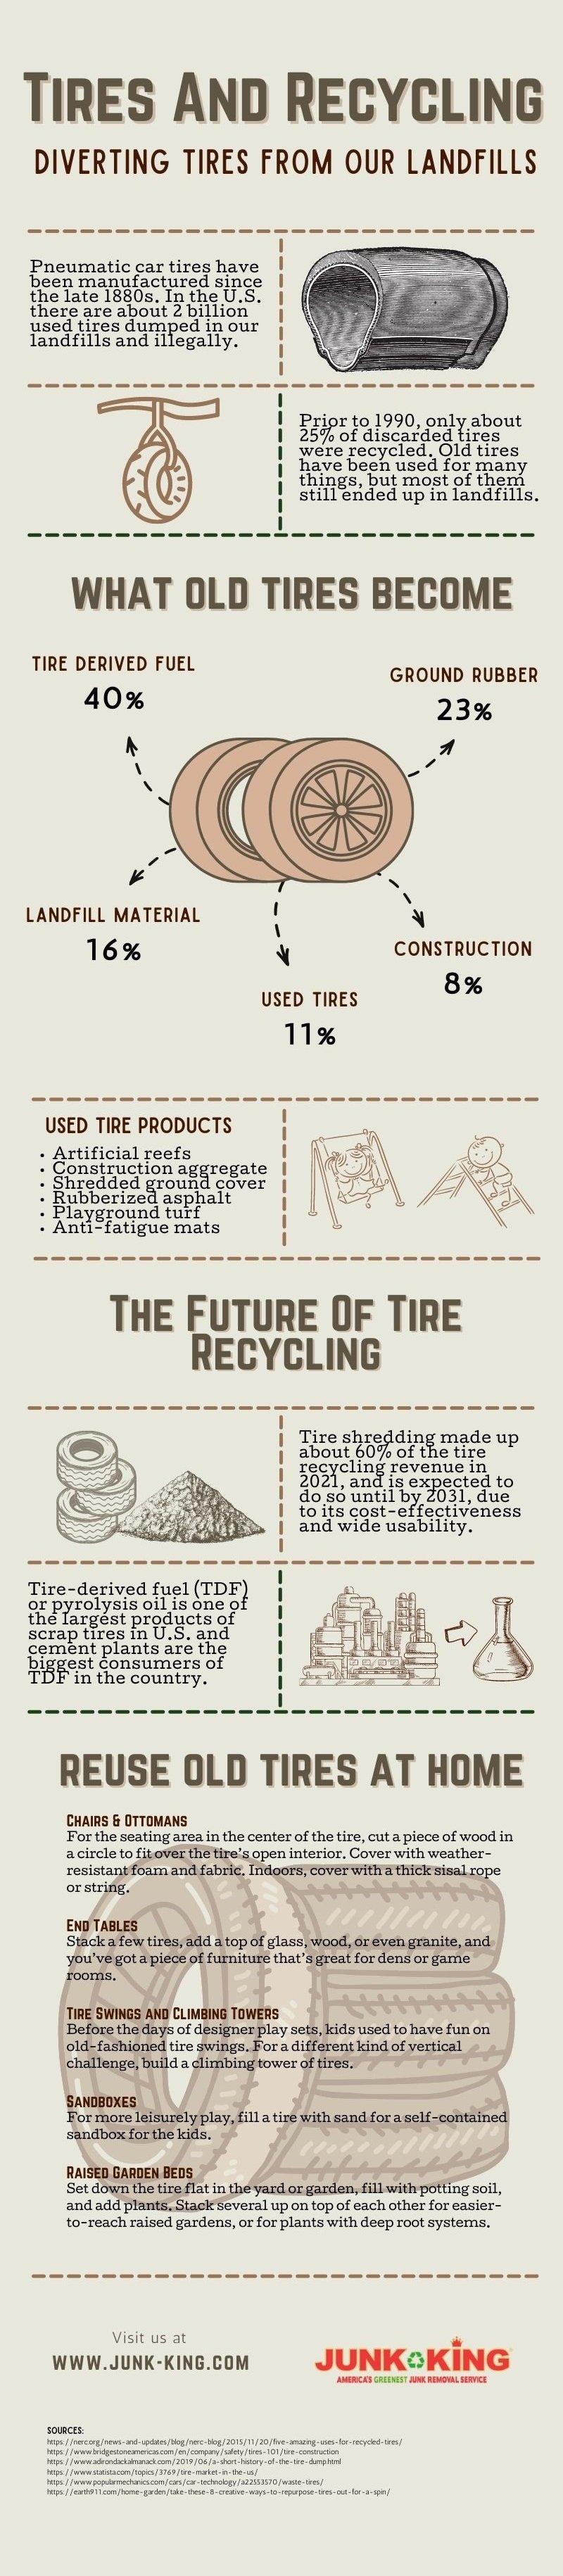 tires-and-recycling